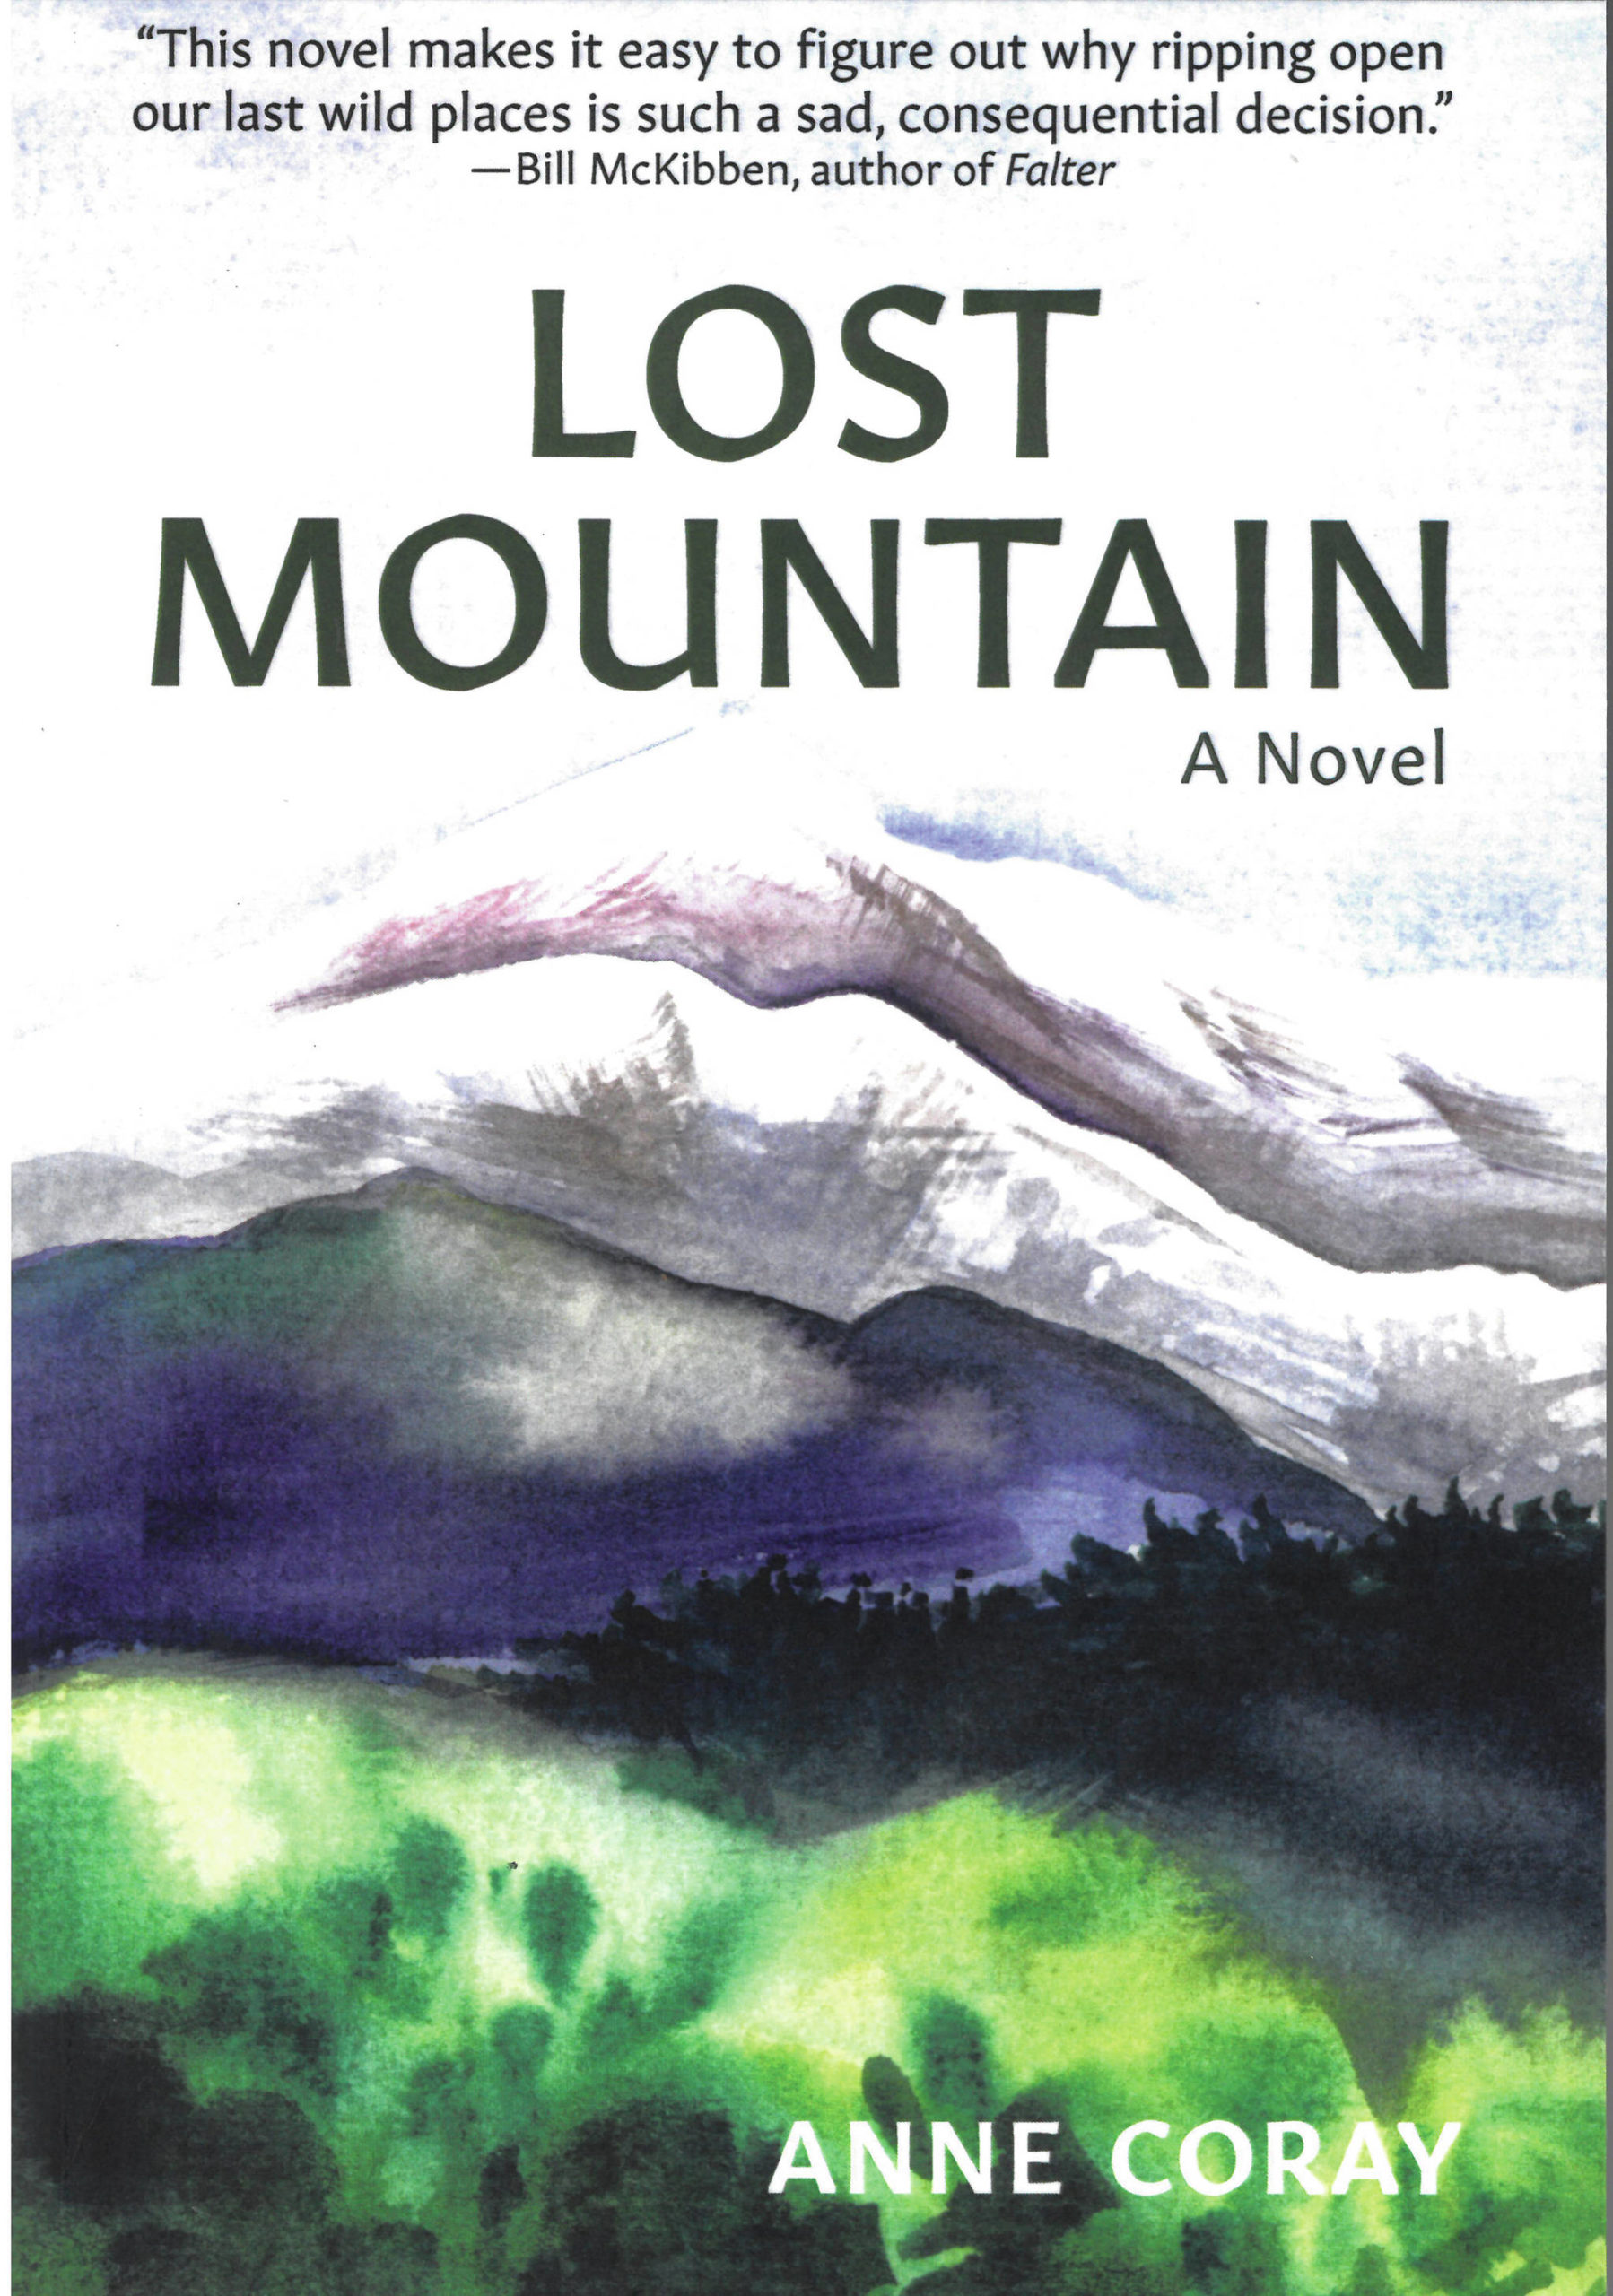 The cover of Anne Coray’s novel, “Lost Mountain.”